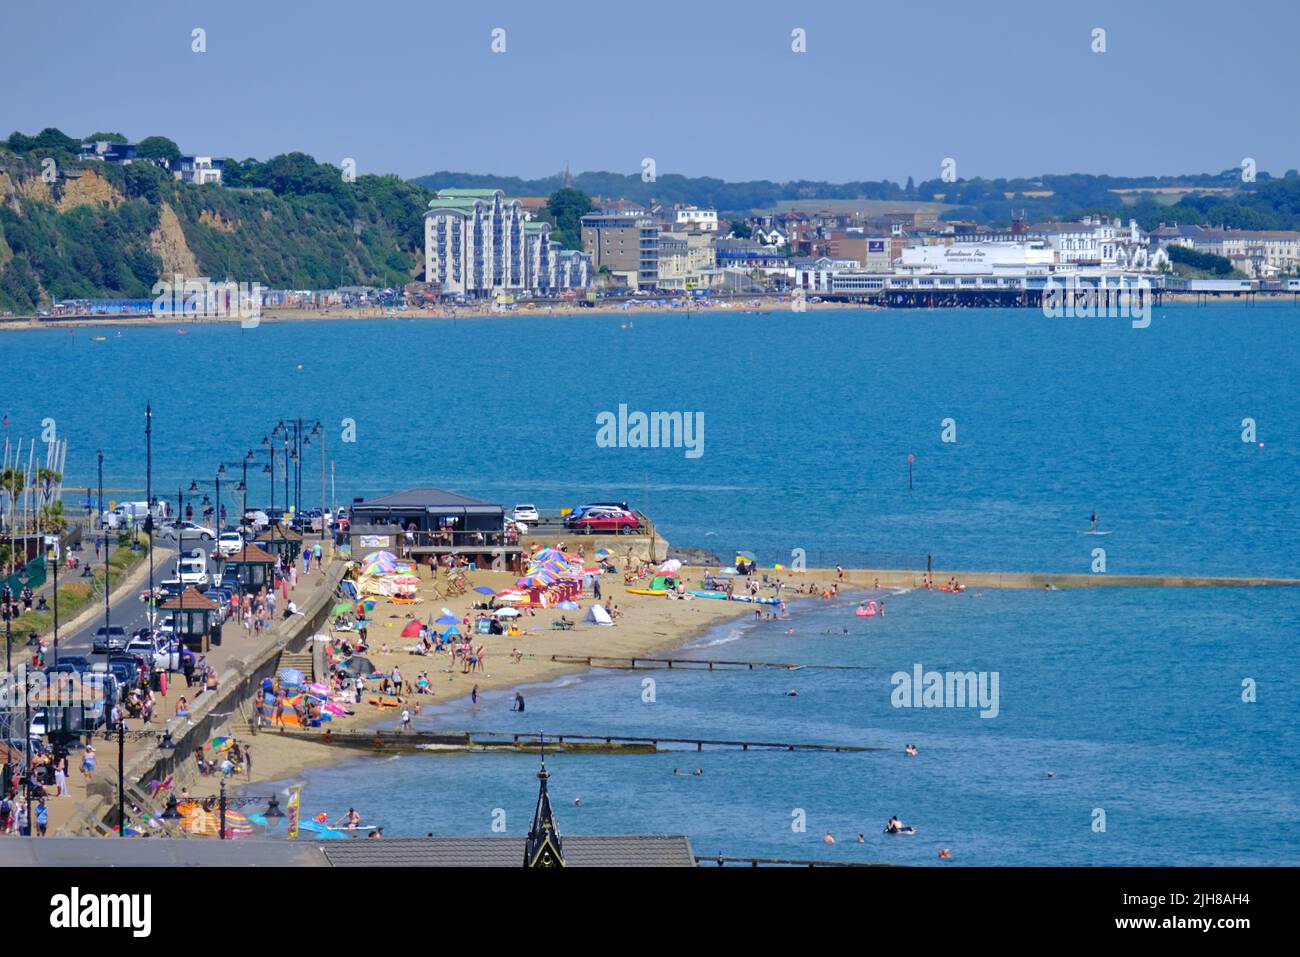 Shanklin, UK, 16th July, 2022. The view across Shanklin (foreground) and Sandown in the distance on the east coast of the Isle of Wight. Visitors make the most of the continuing hot, dry and sunny weather, with temperatures expected to peak on Monday and Tuesday of next week. Parts of England have been issued a Red Extreme weather warning by the Met Office as the mercury has been given a 50% chance of hitting 40 degrees celcius. Credit: Eleventh Hour Photography/Alamy Live News Stock Photo